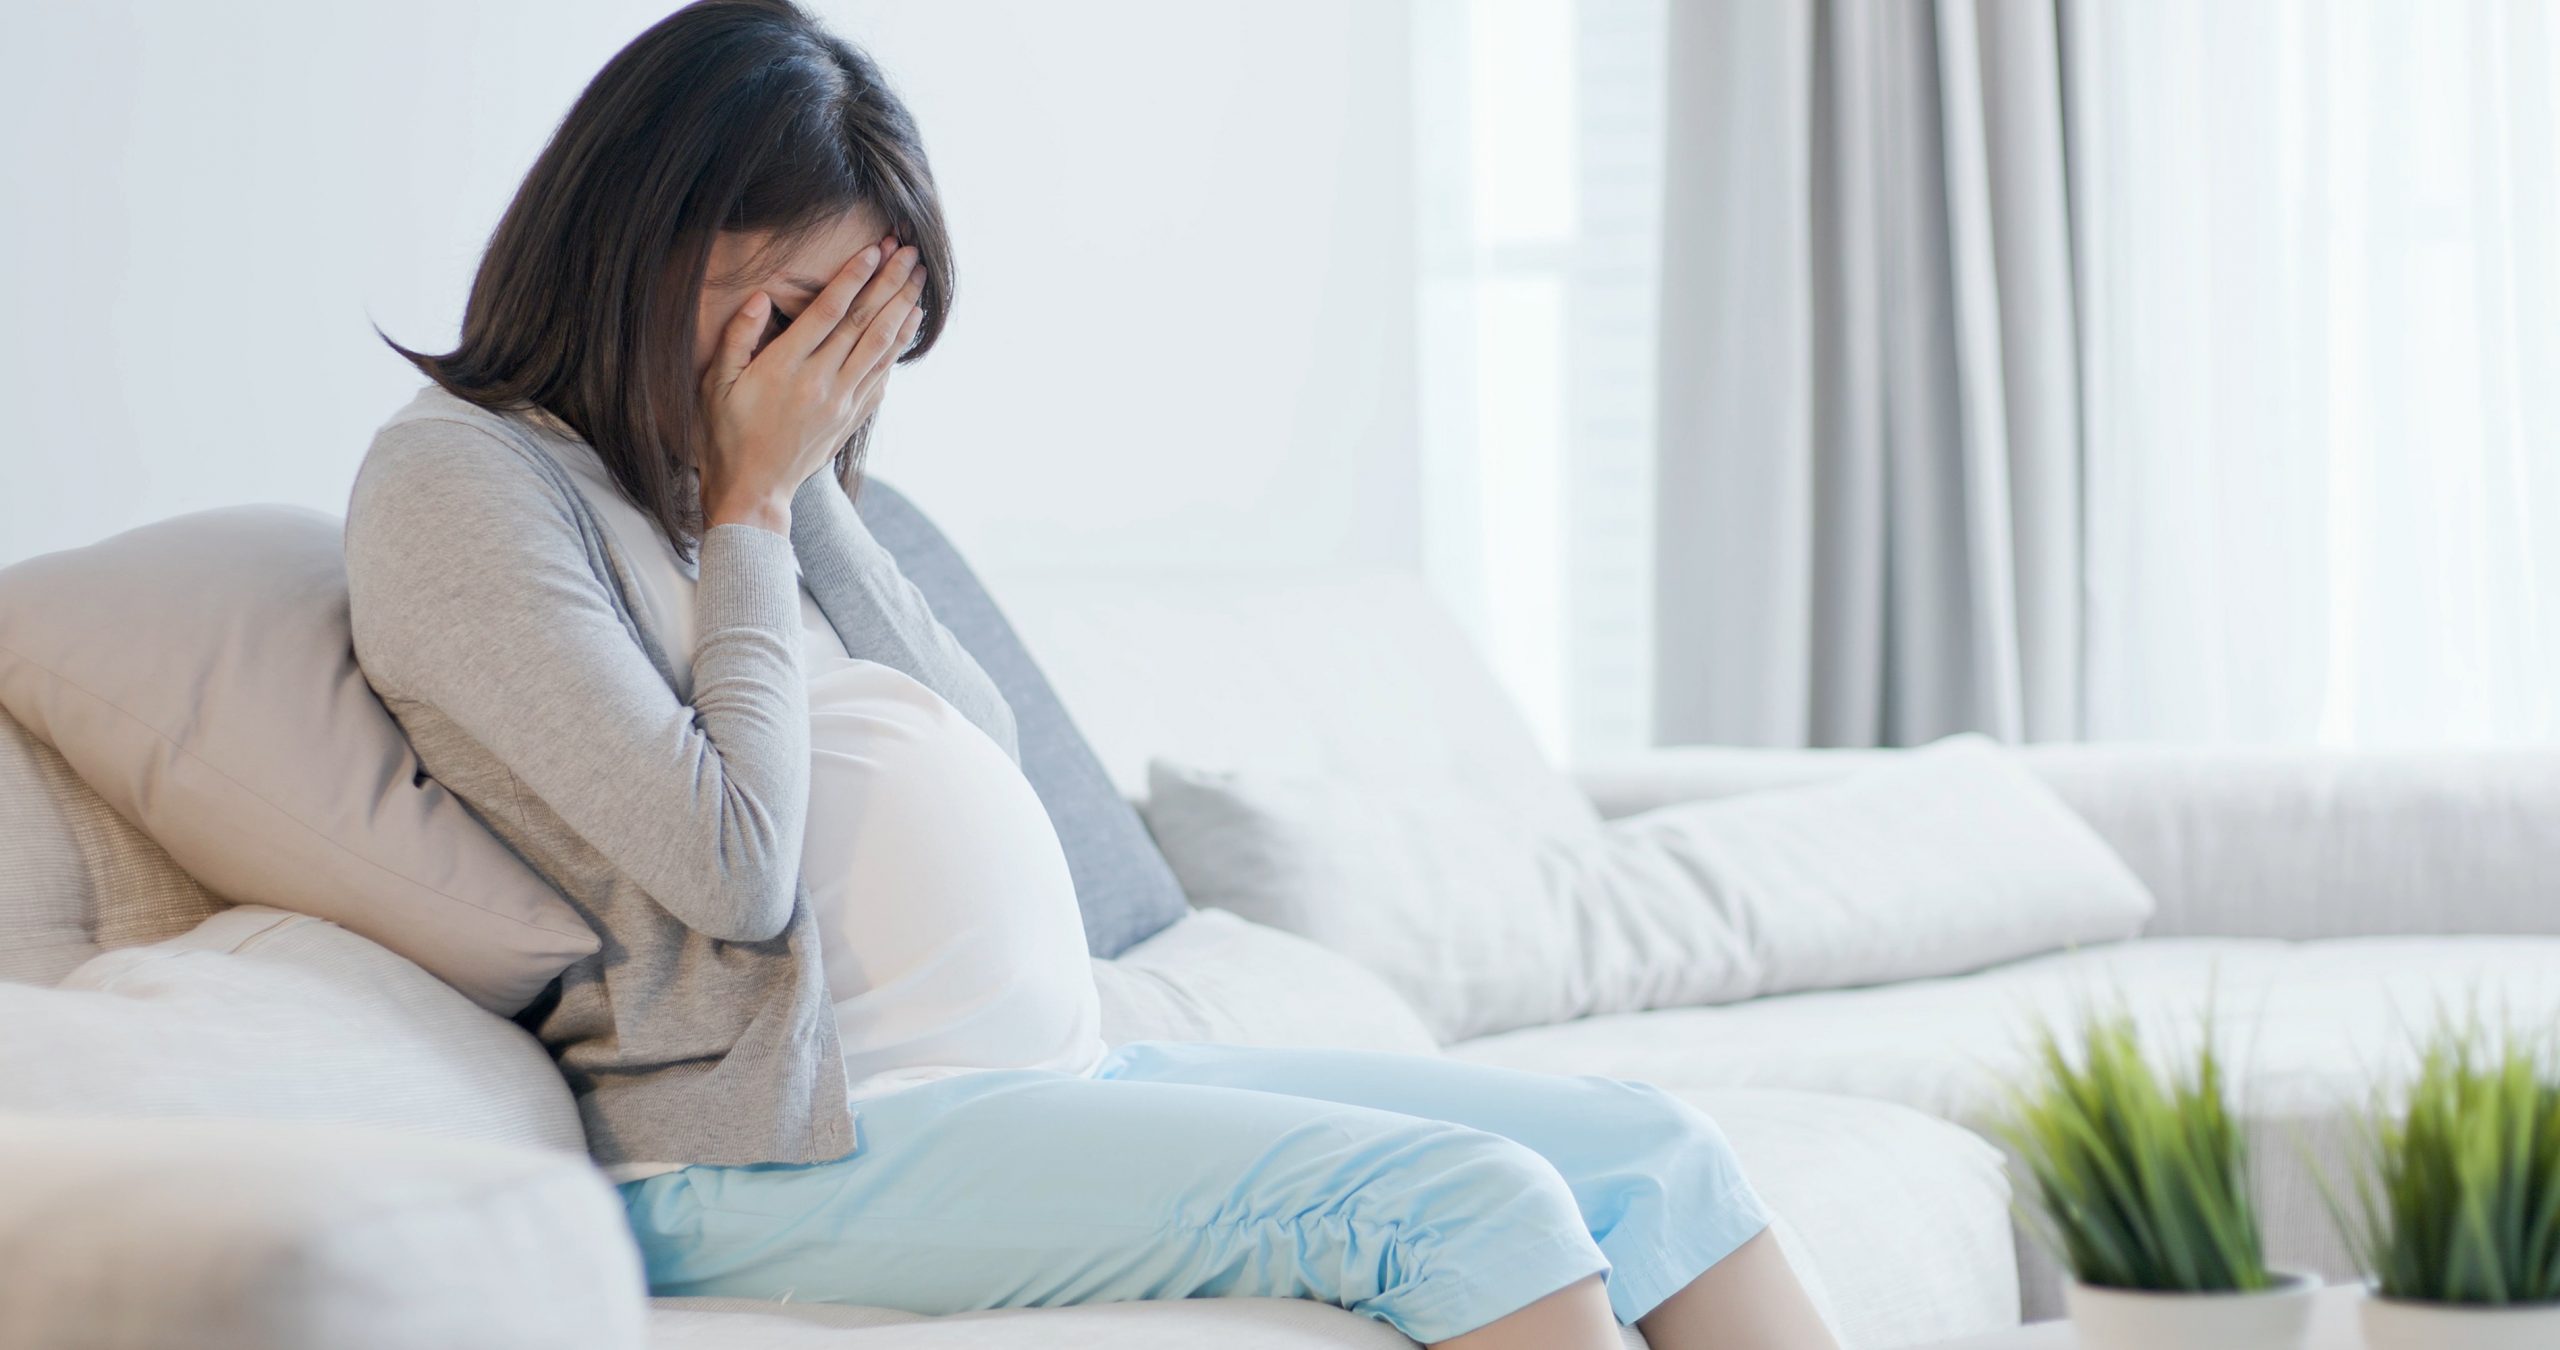 Night work increases miscarriage risk